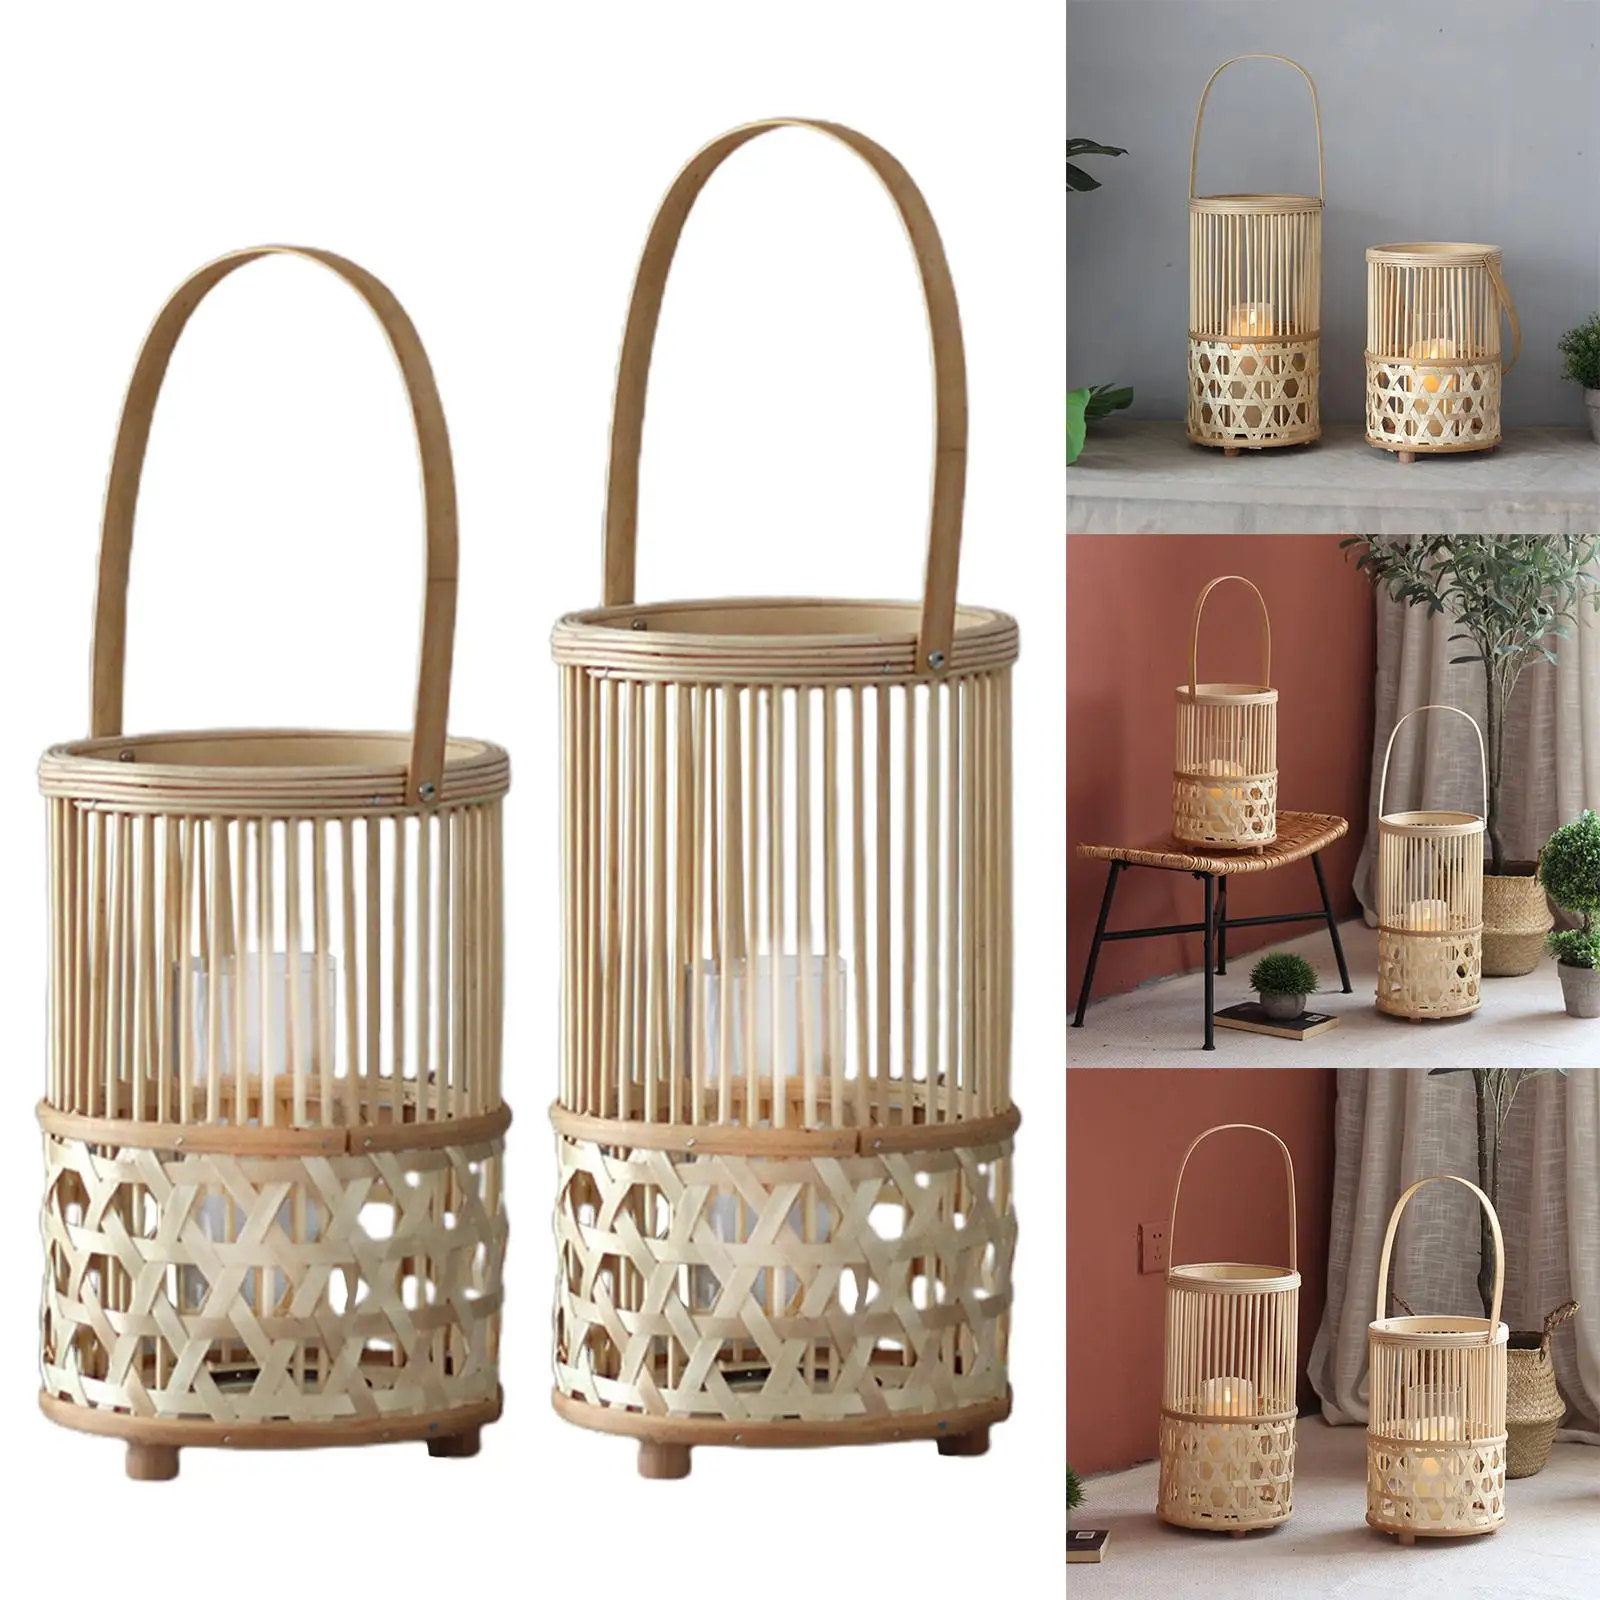 Retro Rattan Natural Lantern with Handle Decoration, Solid and Durable Tabletop Decor Lovely Home Collection Hollow Design Gift